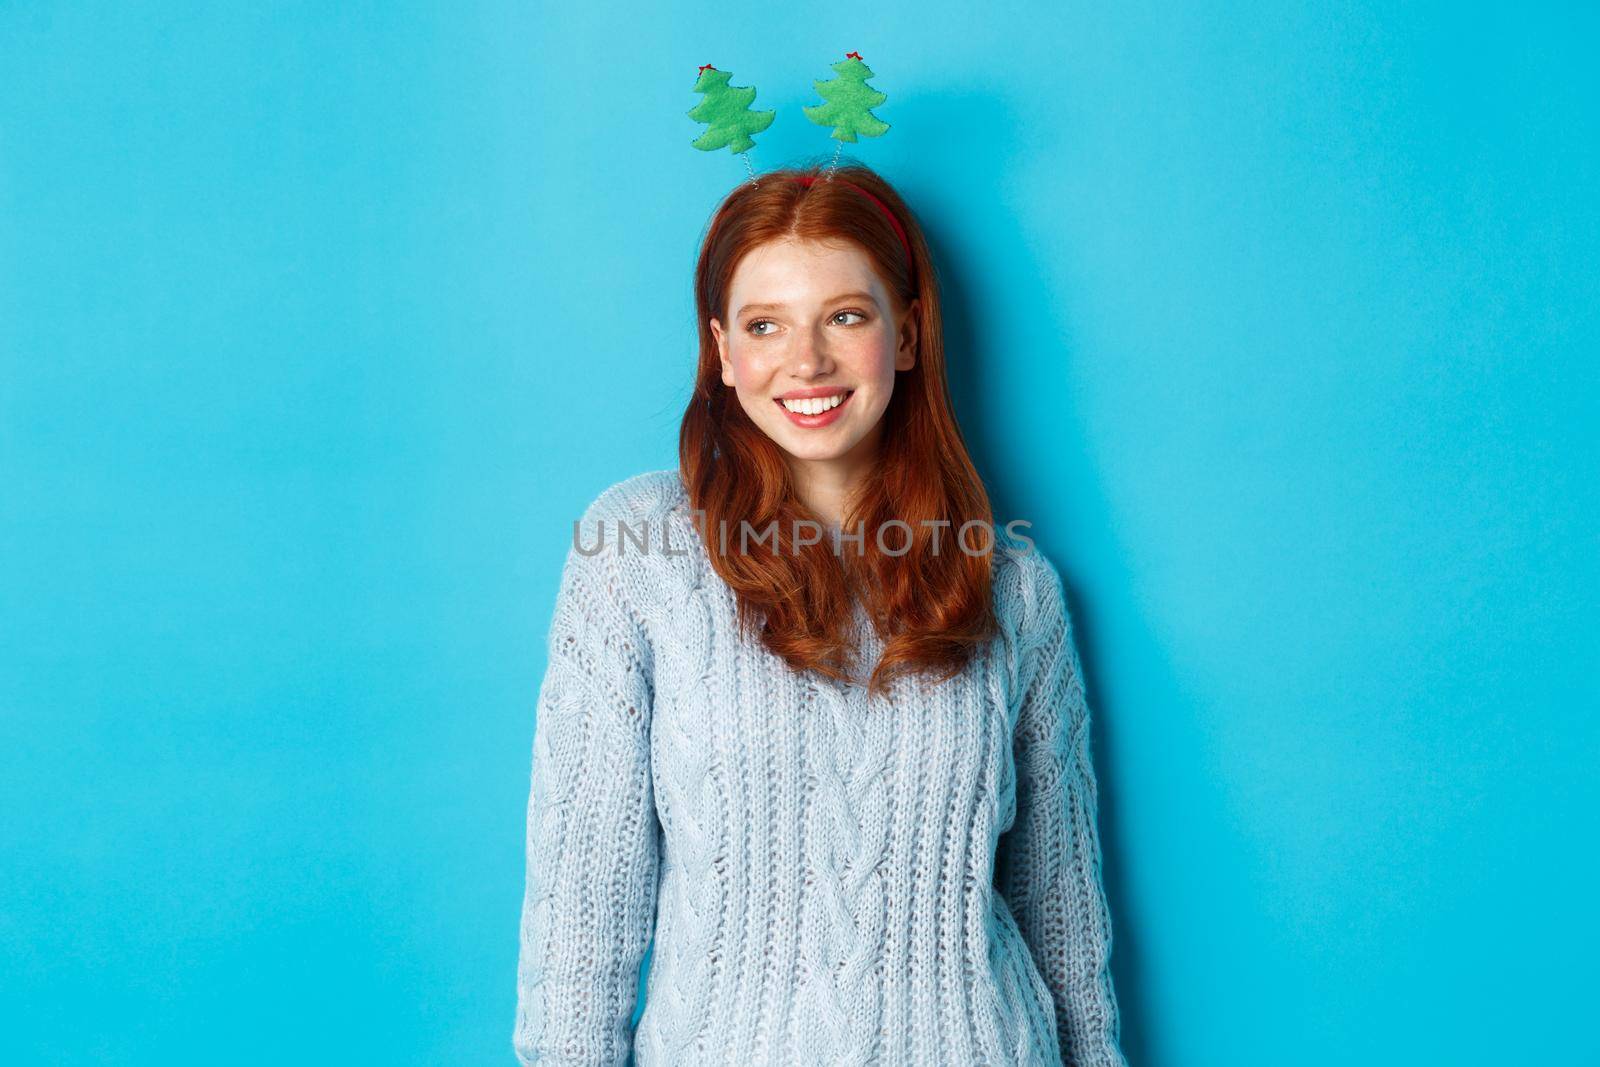 Winter holidays and Christmas sales concept. Cute redhead girl in funny New Year headband smiling, looking left at logo, standing over blue background.